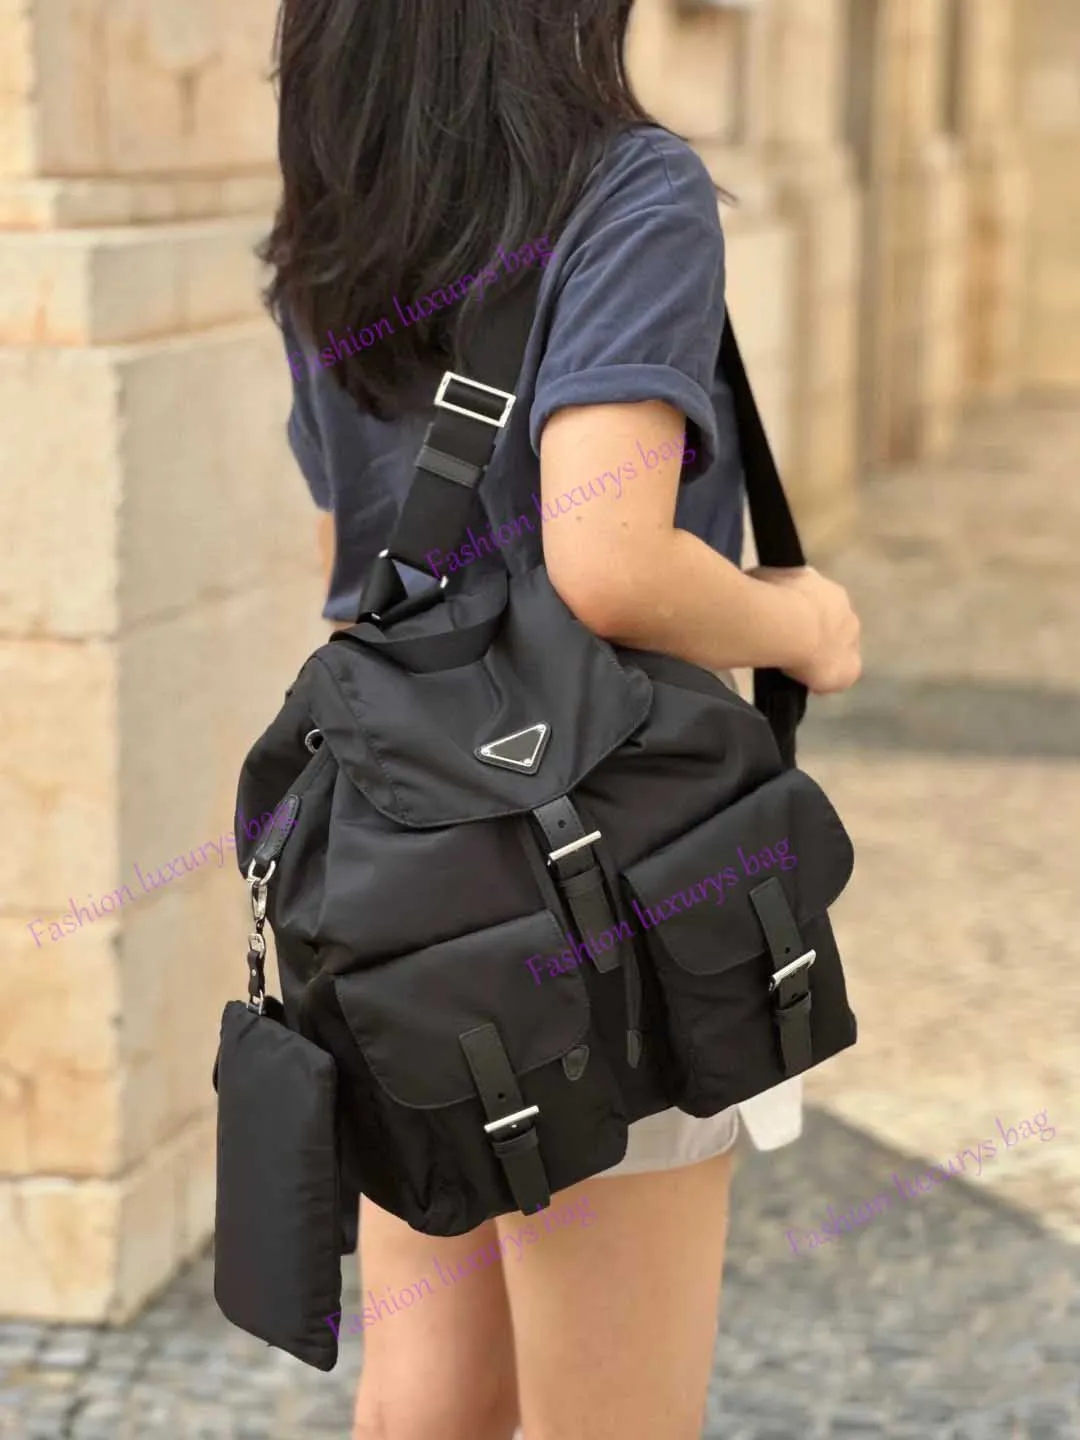 Daily Outfit Backpack Style New Men Women Fashion Casual waterproof backpack Design Luxury Nylon Backpack School Bag Top Mirror Quality Pouch Wallet Outdoor Bag